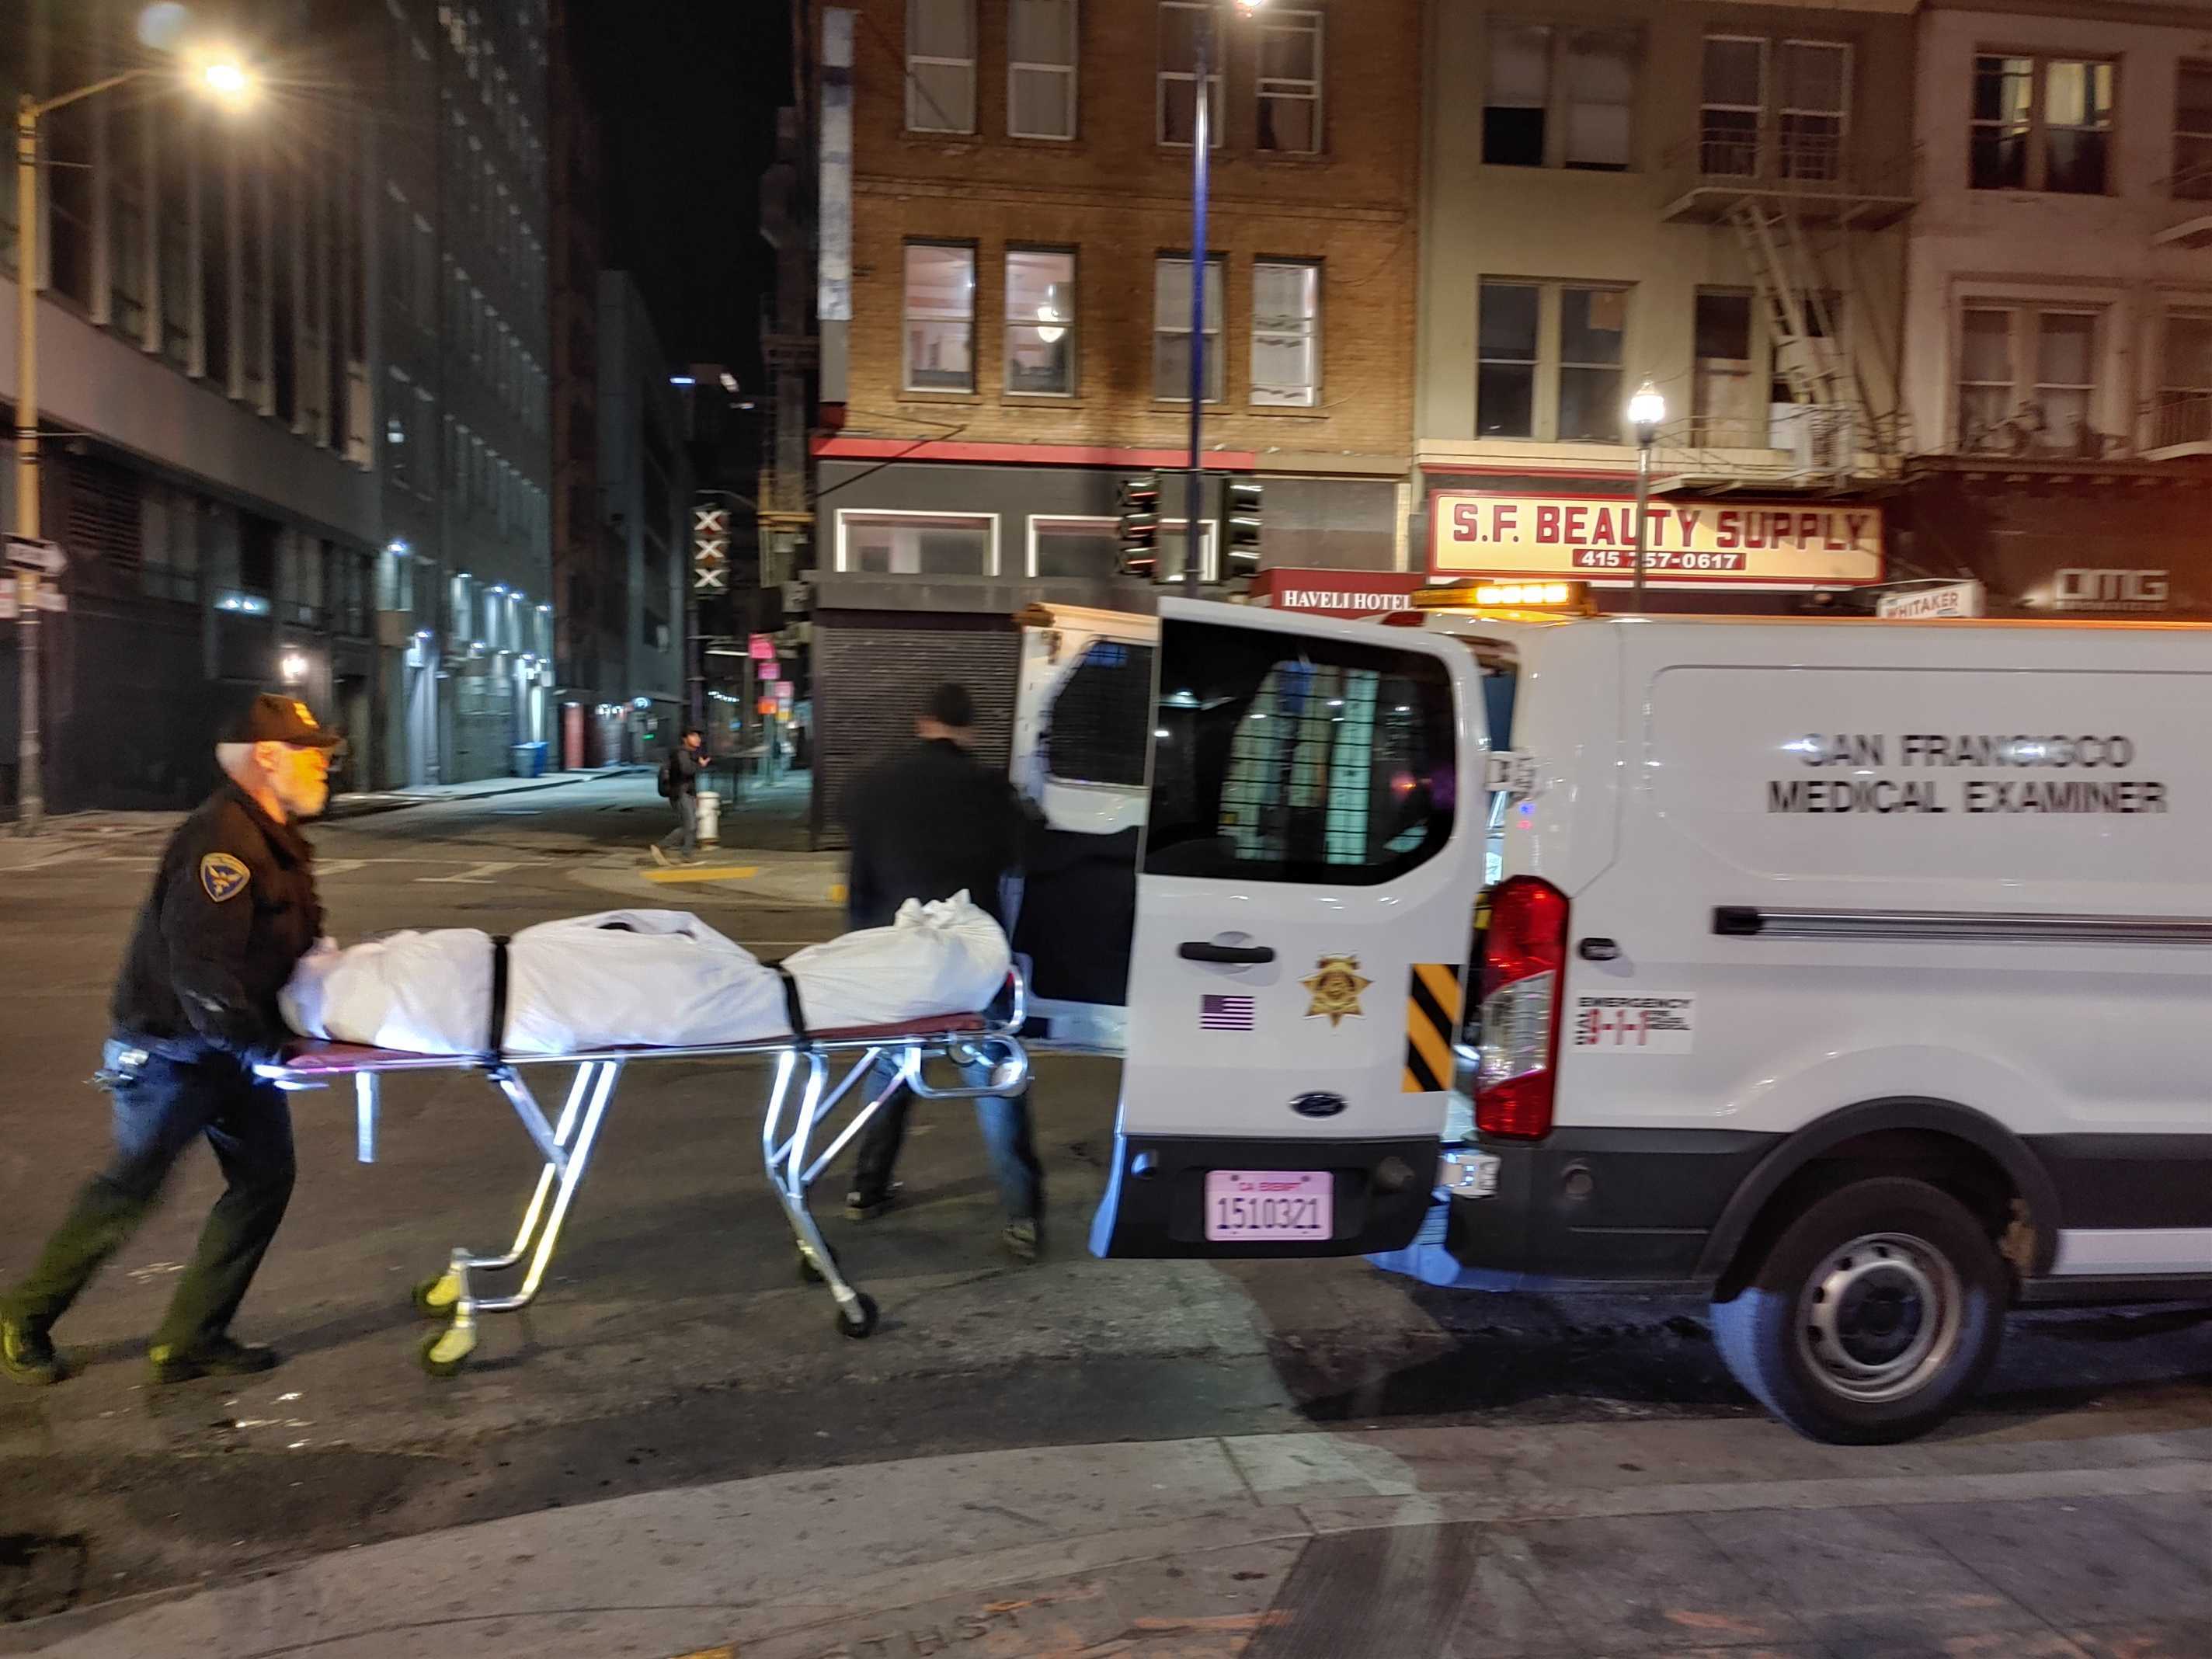 Officials are loading a covered stretcher into a medical examiner's van at night on a city street.